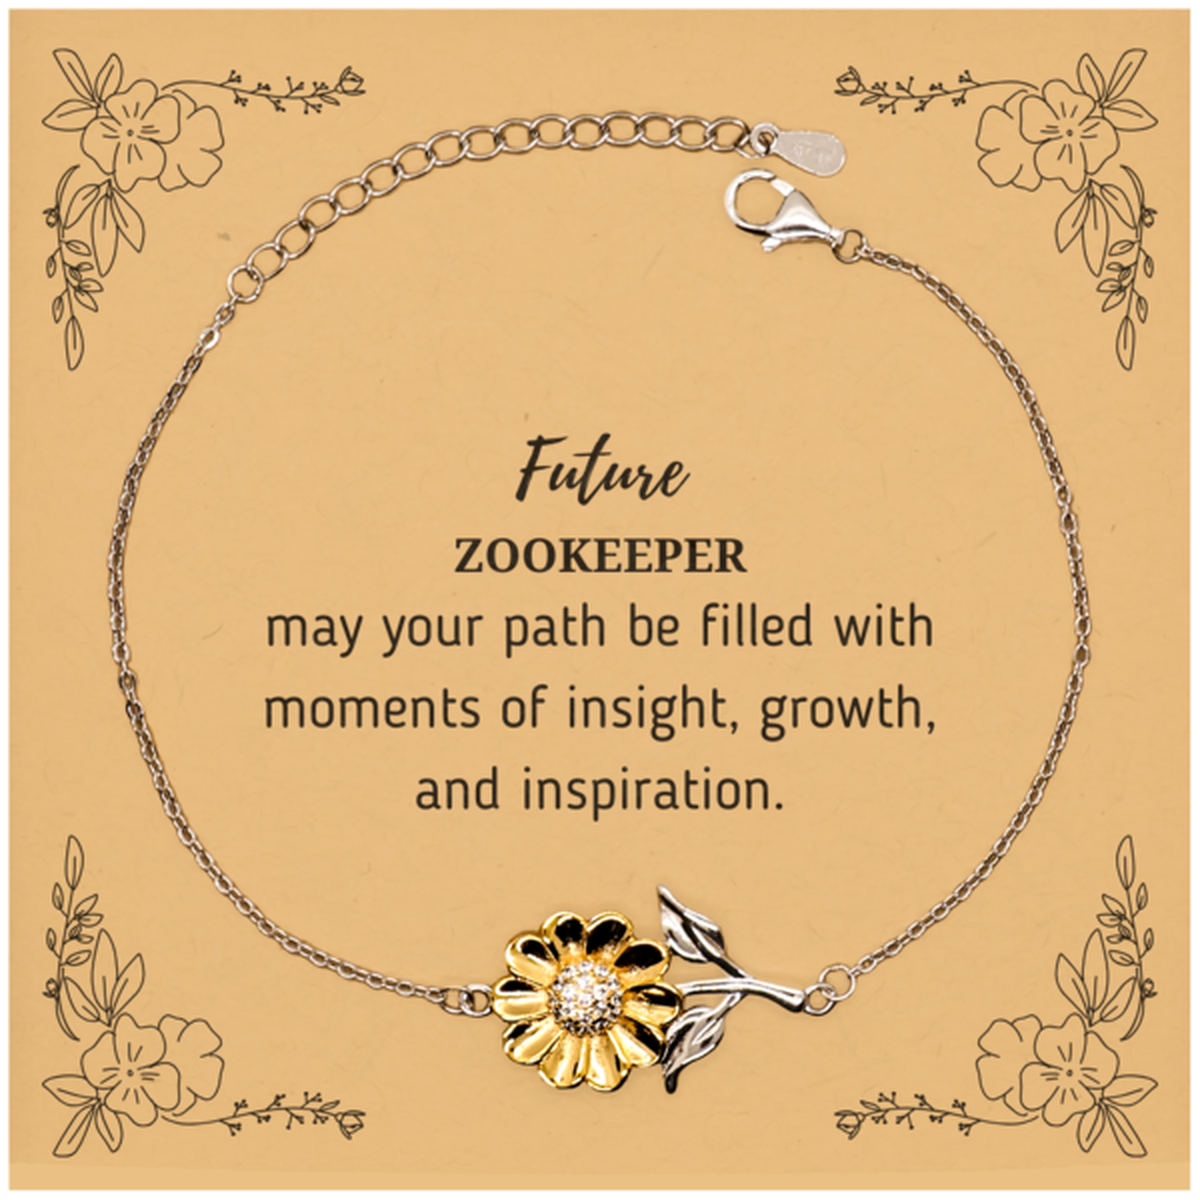 Future Zookeeper Gifts, May your path be filled with moments of insight, Graduation Gifts for New Zookeeper, Christmas Unique Sunflower Bracelet For Men, Women, Friends